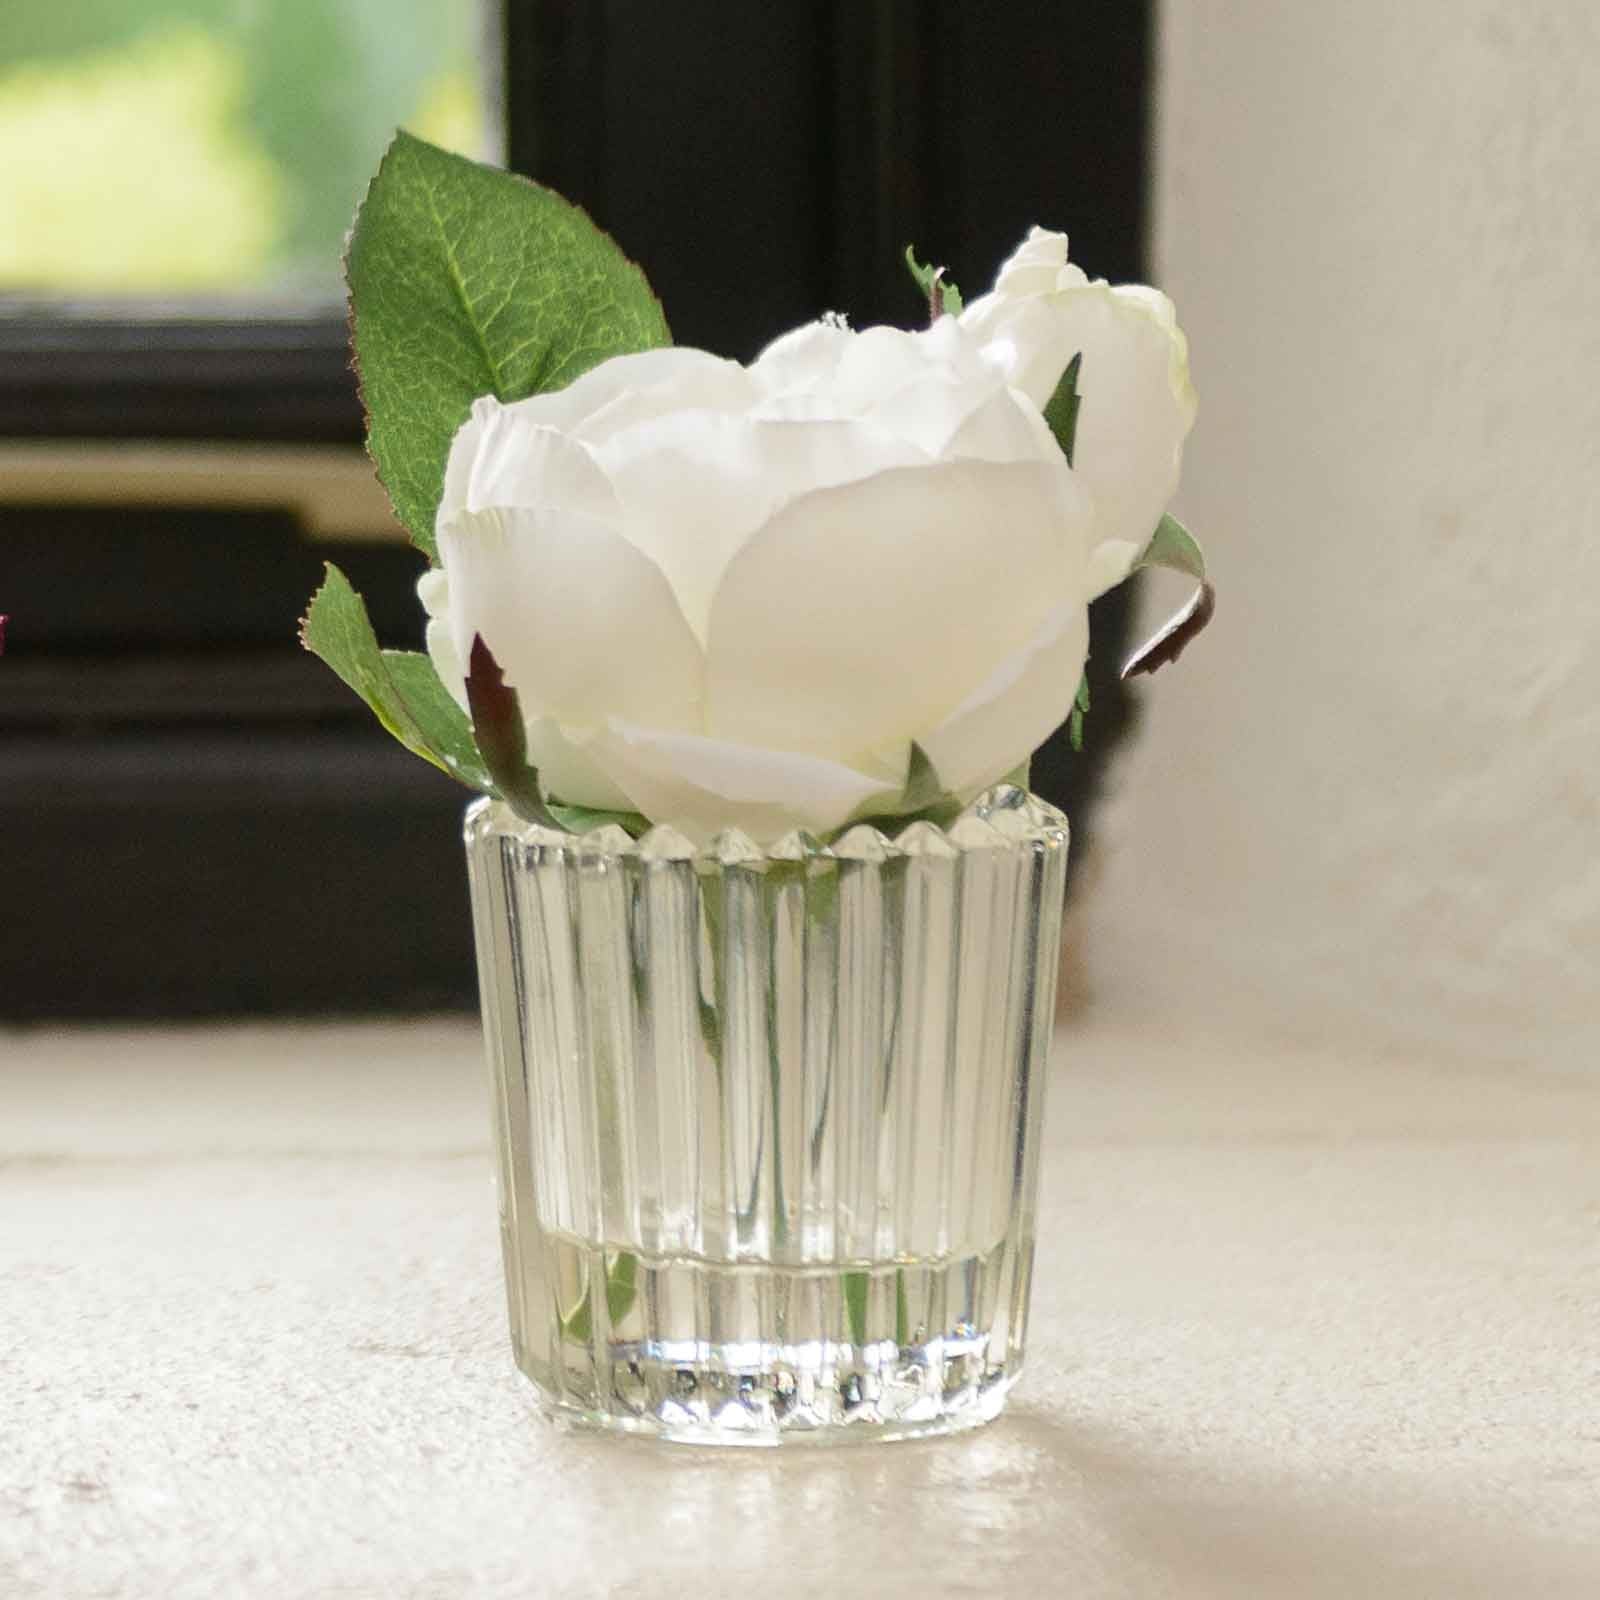 White Rose Stem in Small Vase by Sia - Harrod Horticultural